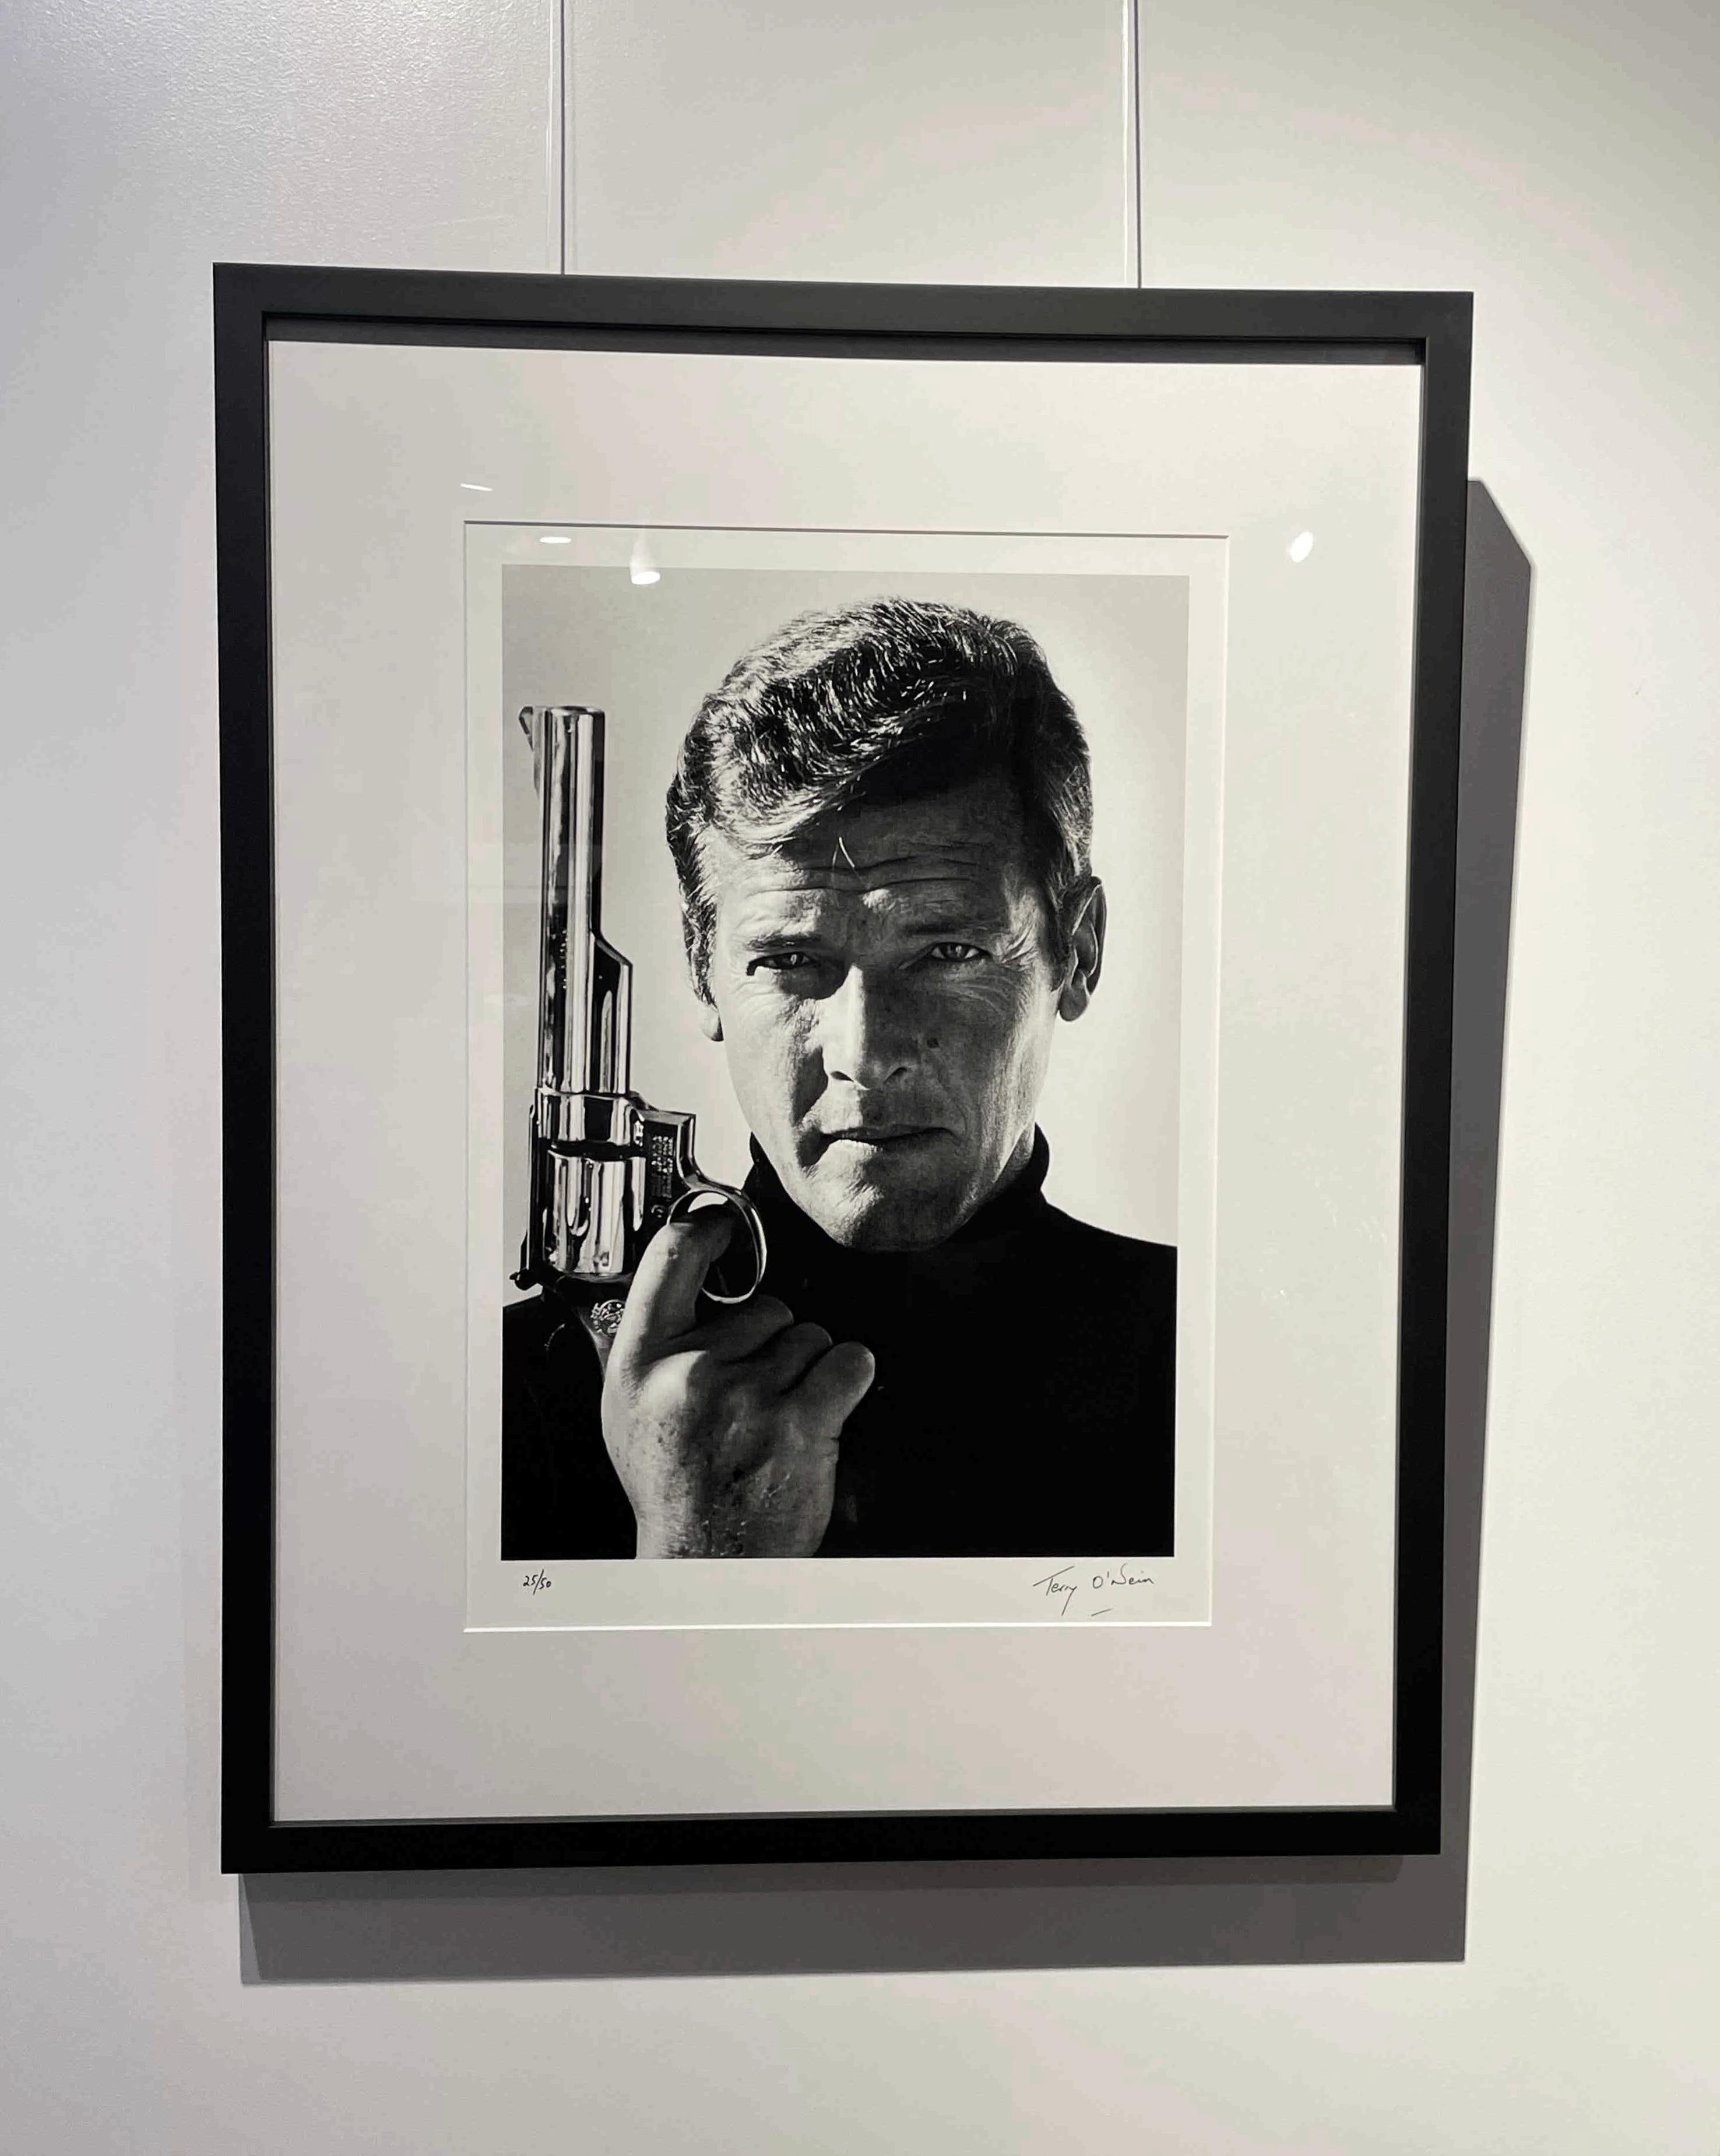 Terry O'Neill Portrait Photograph - Roger Moore 007 Edition 25/50 Digitally Signed